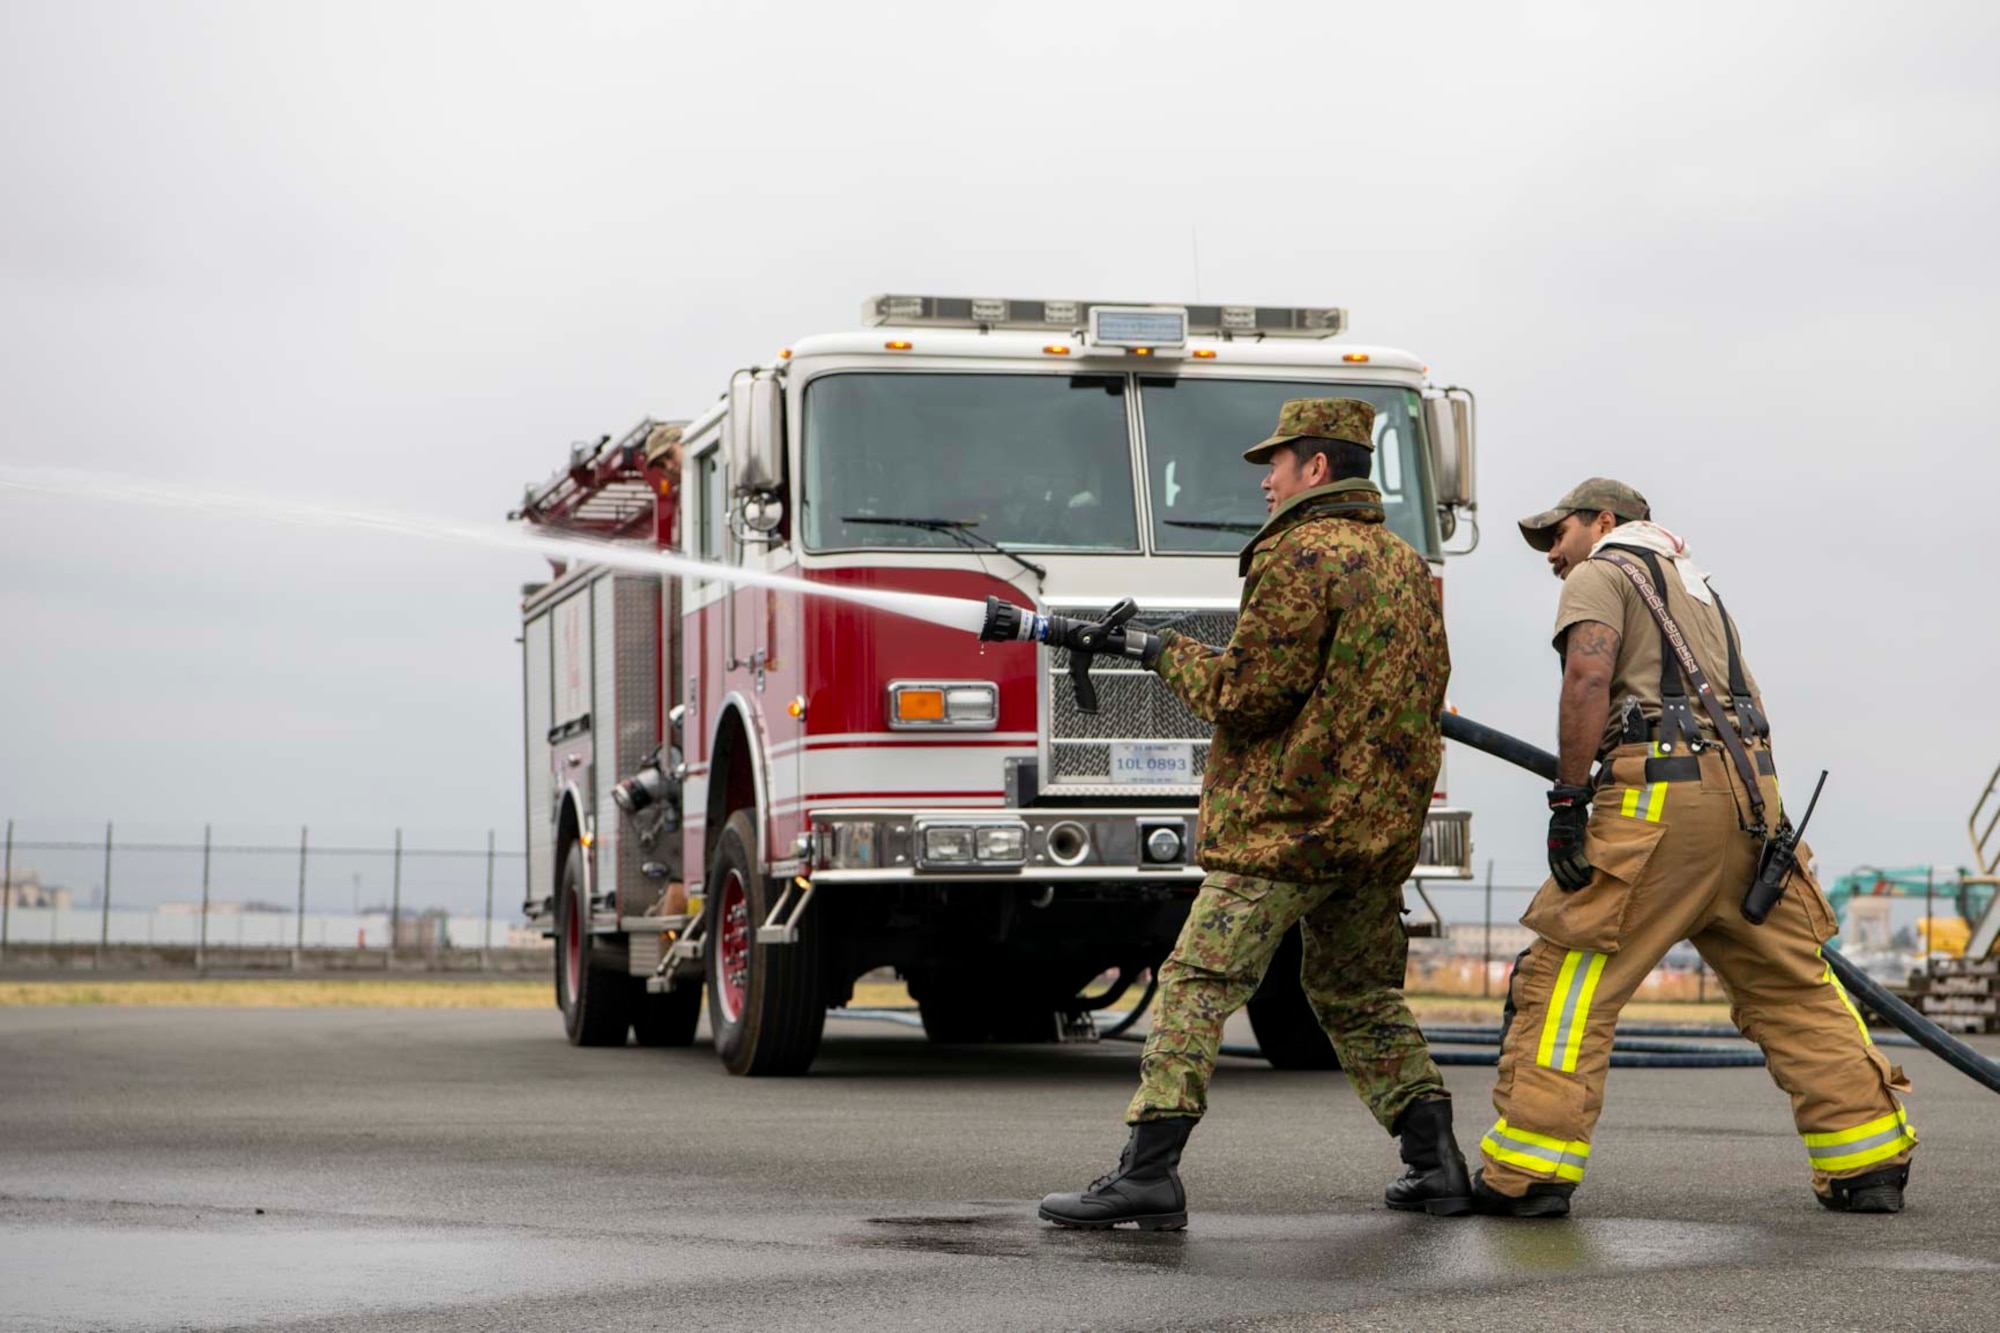 A Japanese military member and U.S. firefighter spray water out of a fire hose.